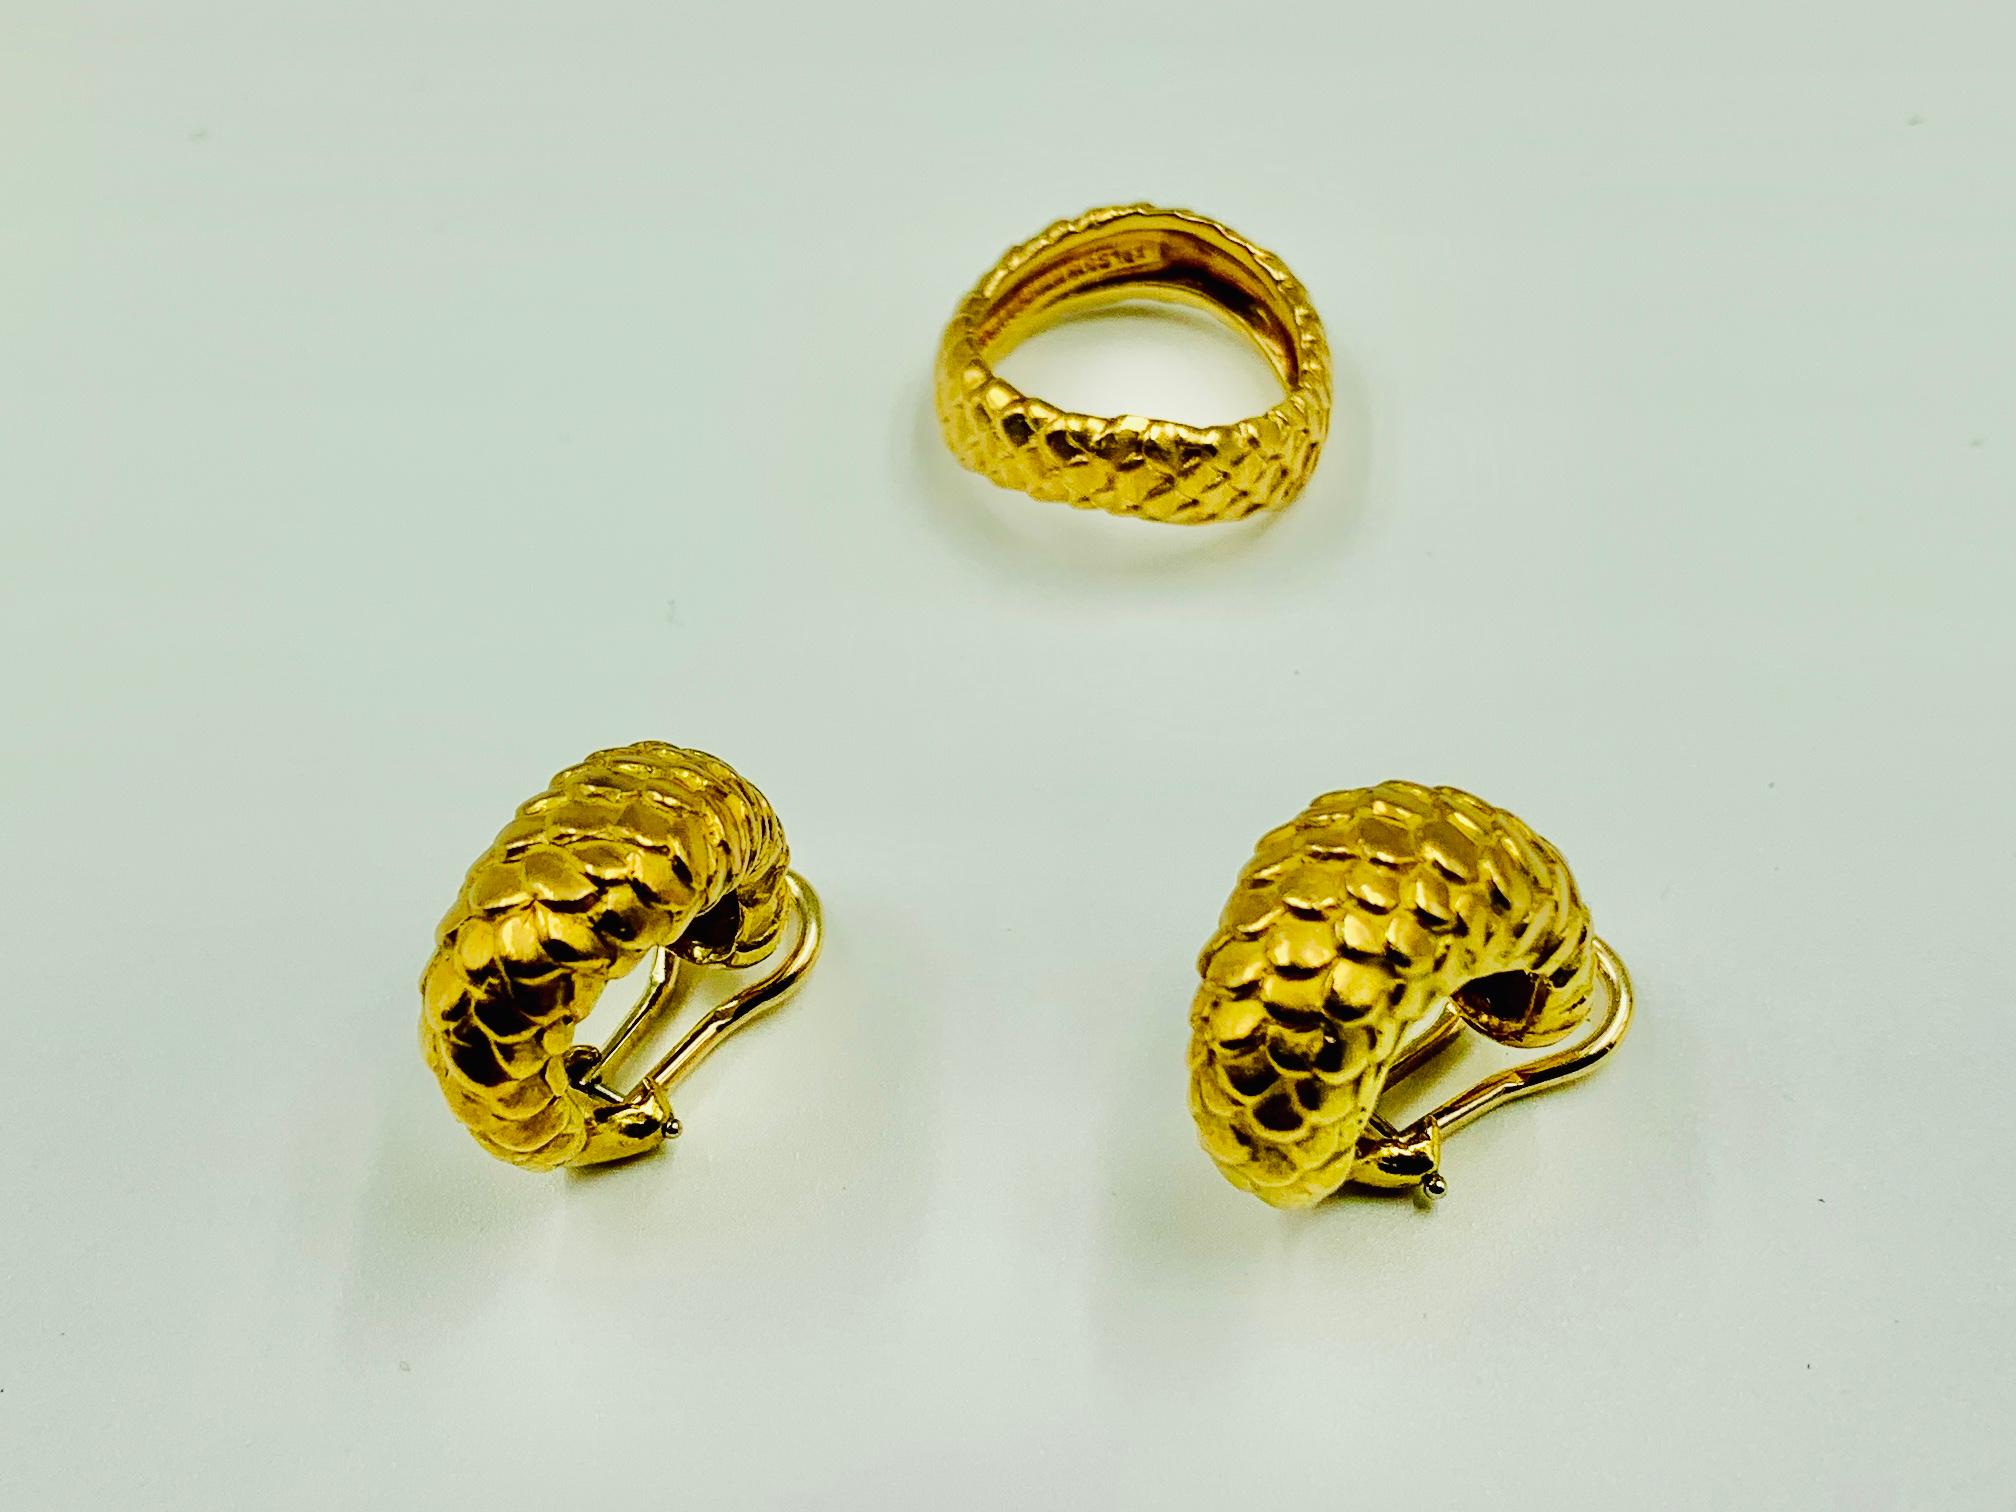 Solid gold, great quality and weight earclips in the form of the body of a sinuous snake, very good condition, signed on the interior 1986 Cummings 18K
Angela Cummings is an iconic designer closely associated with Tiffany & Co., for whom she began